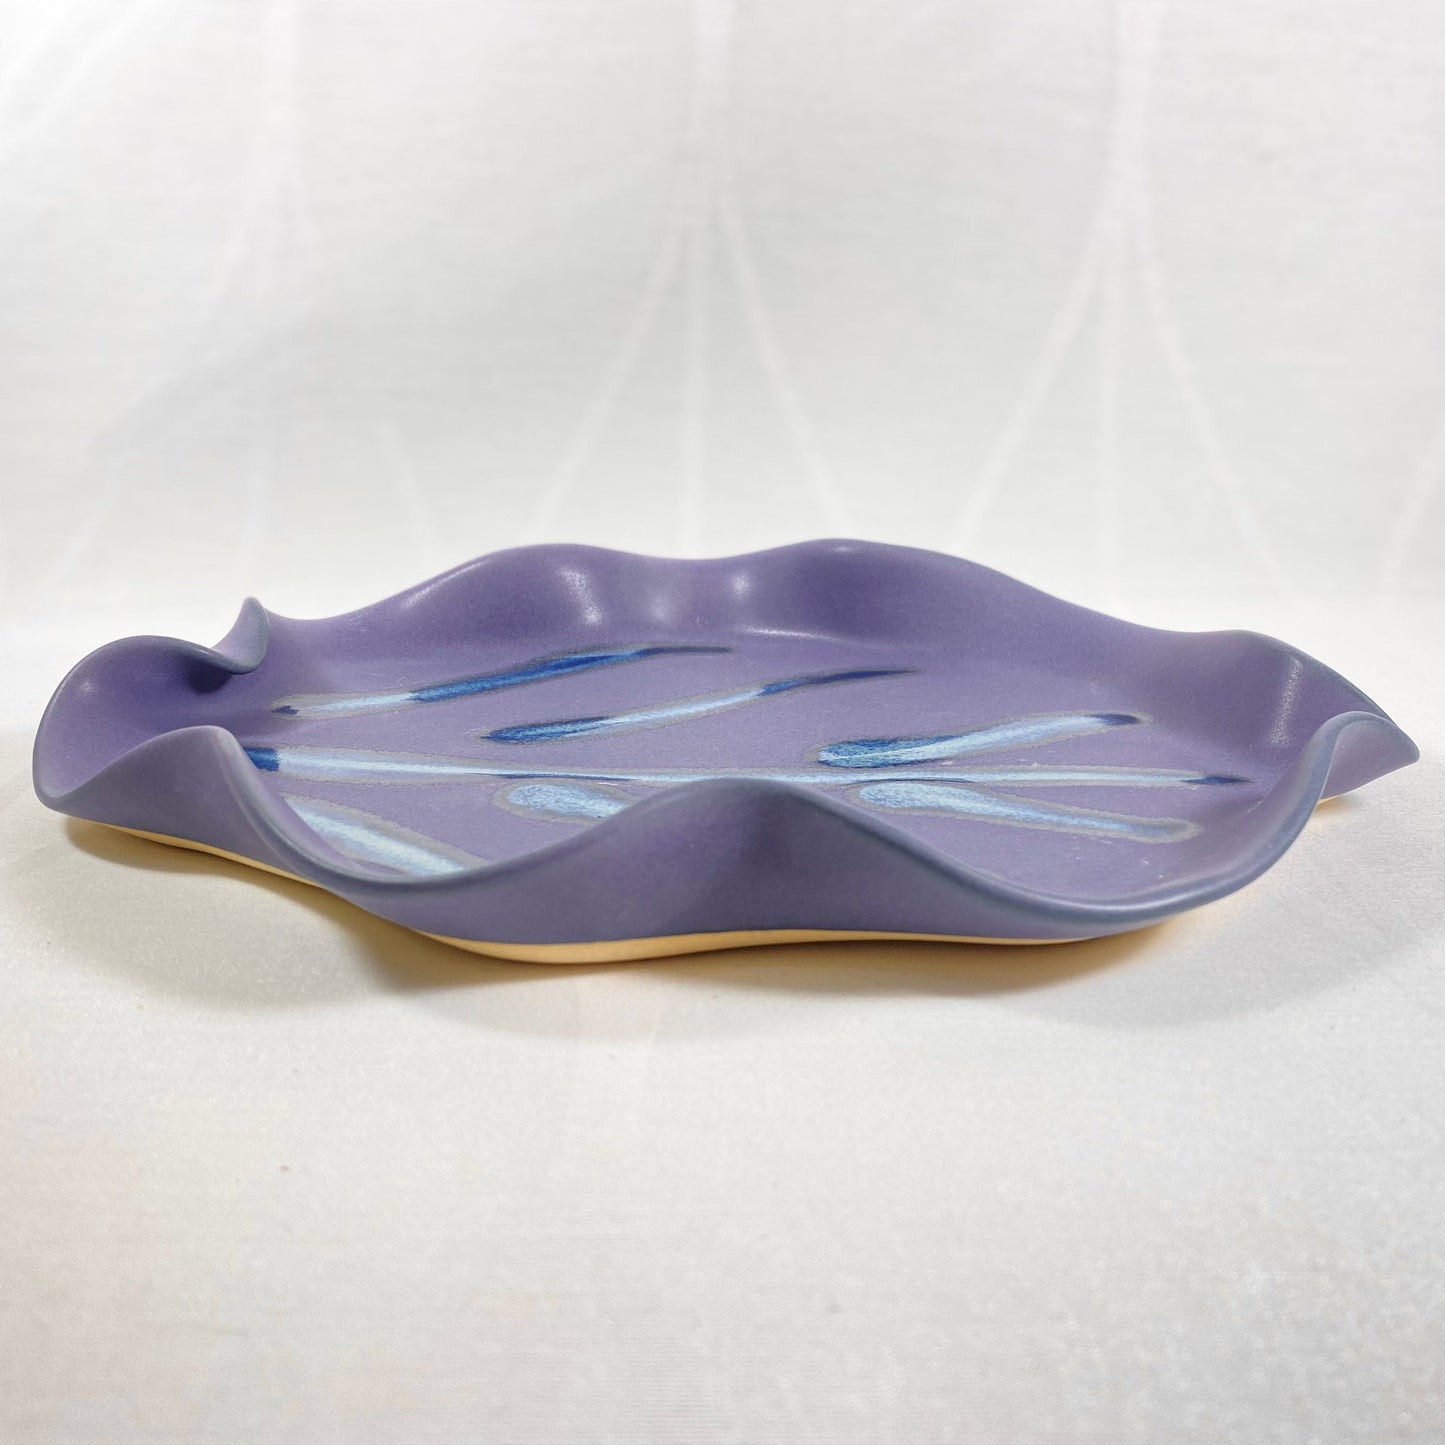 Handmade Purple and Blue Snack Plate, Functional and Decorative Pottery